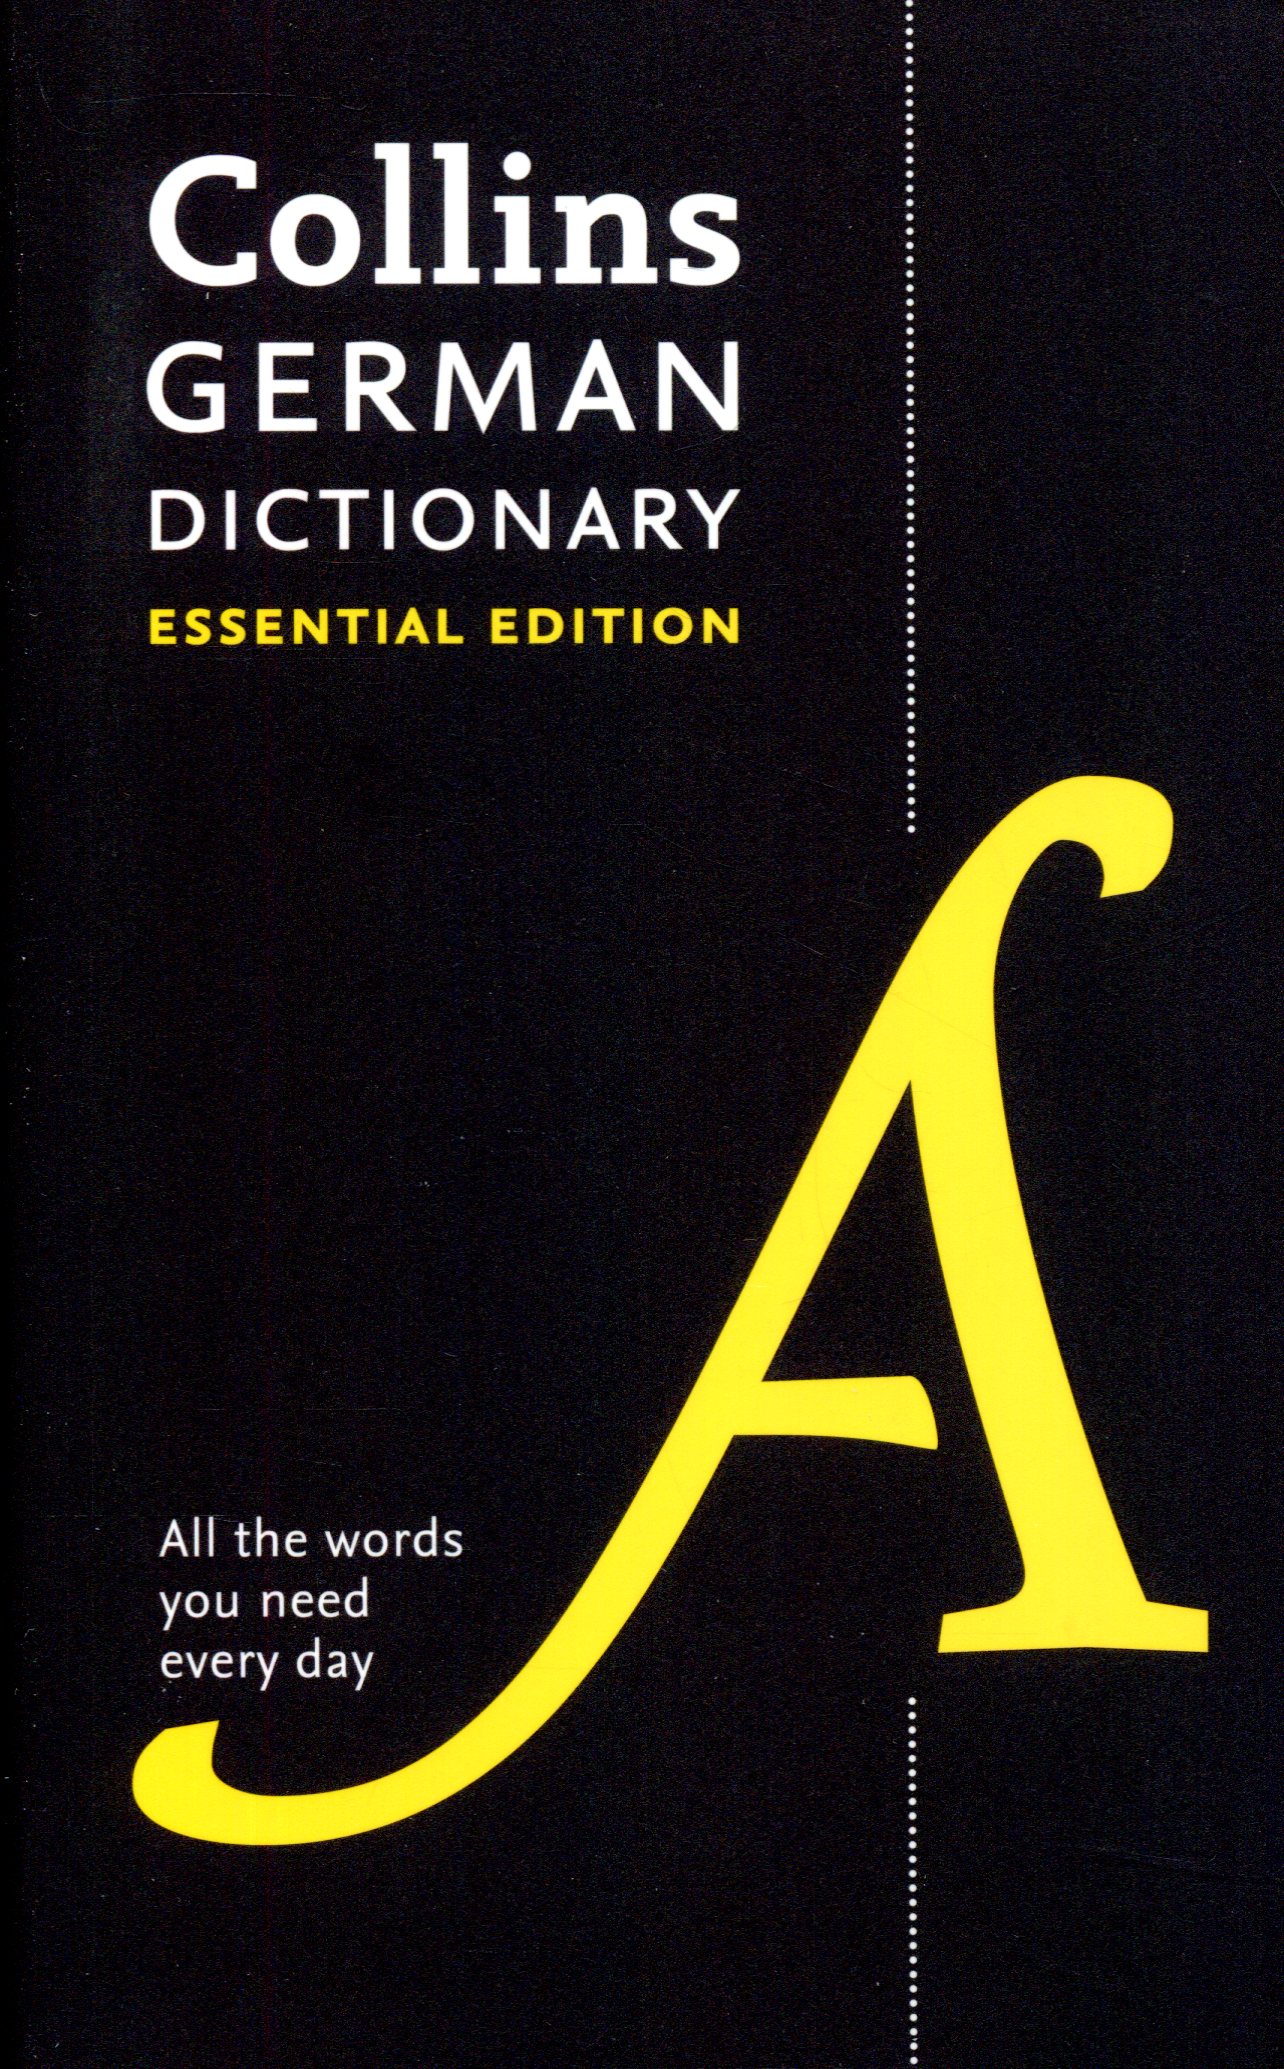 COLLINS German Dictionary Essential Edition